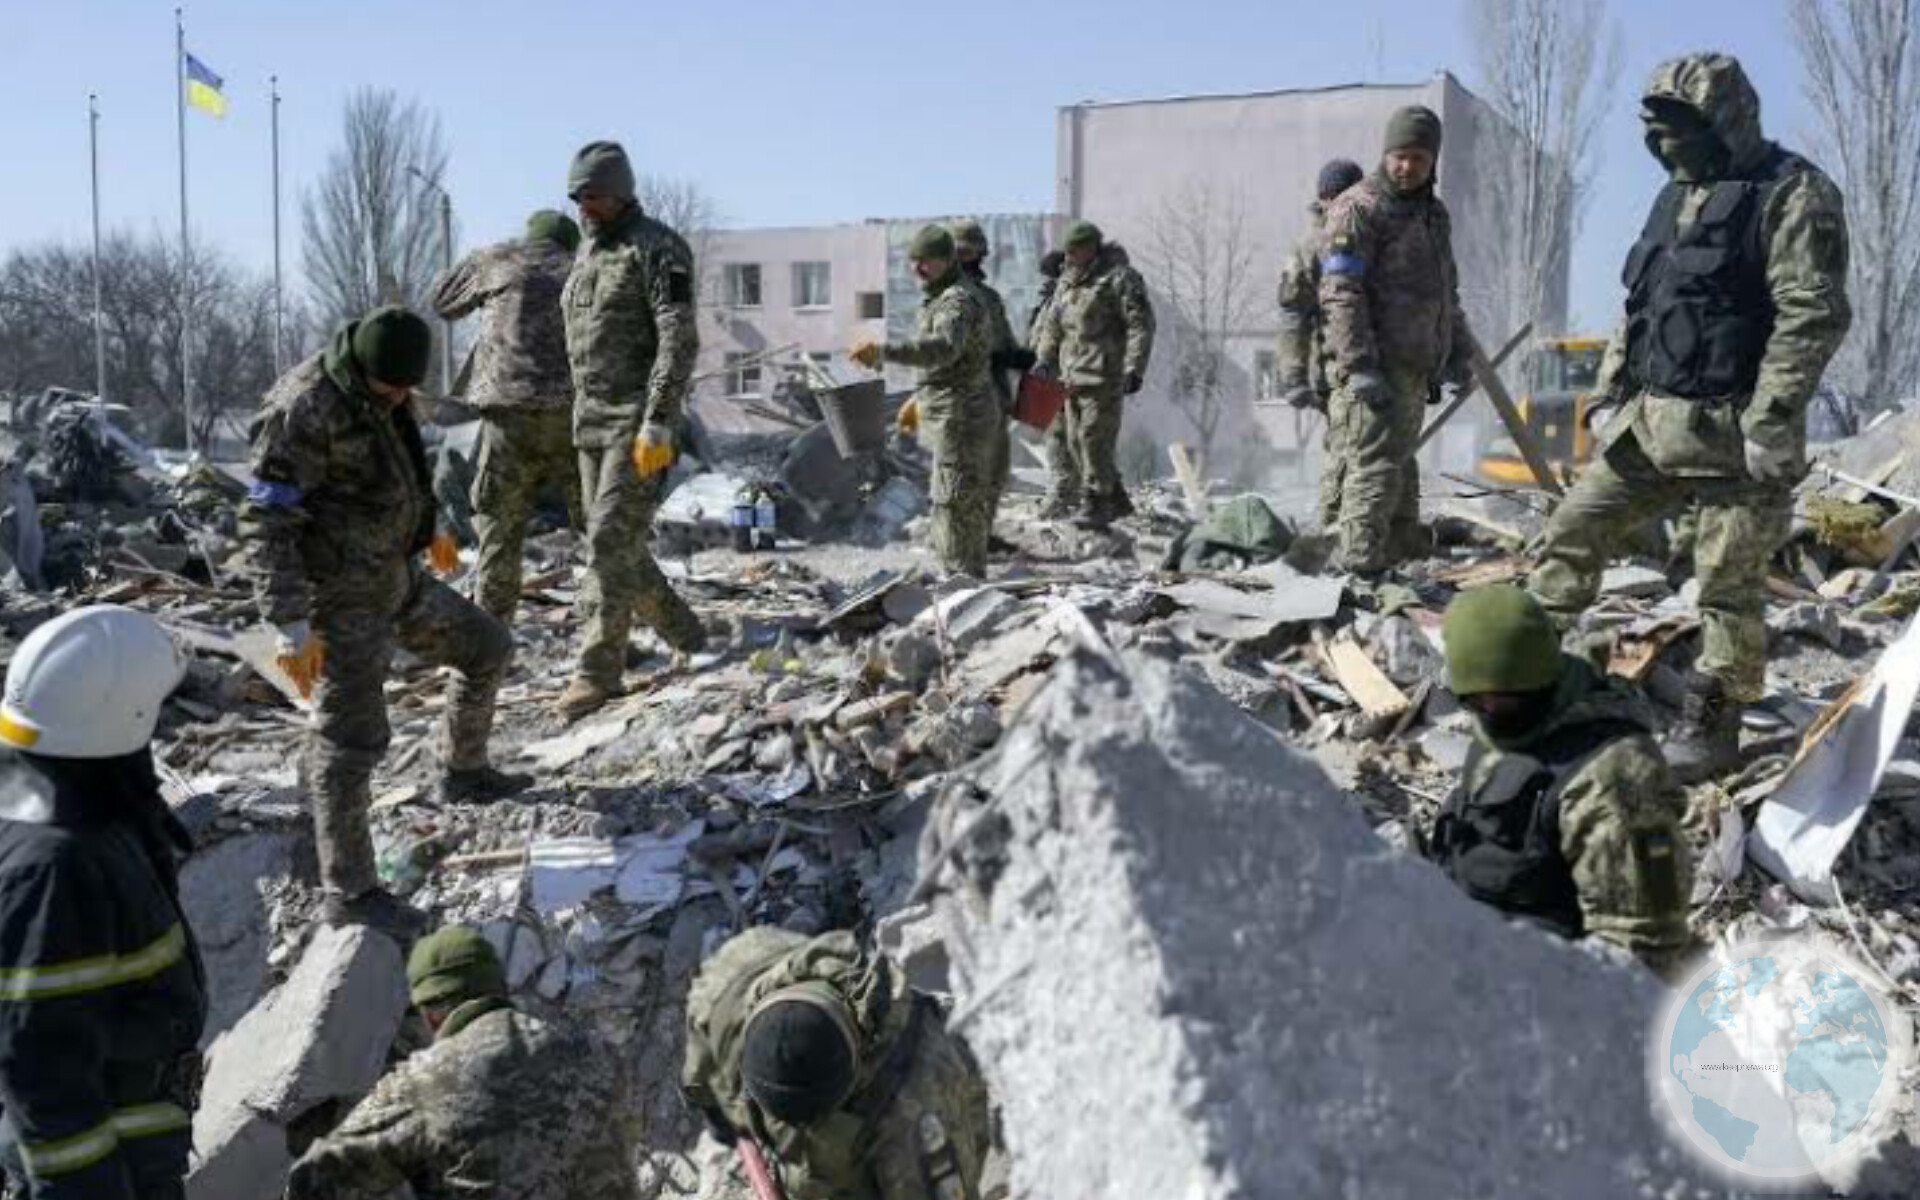 64 Russian Soldiers were Killed in the Ukrainian Missile Attack